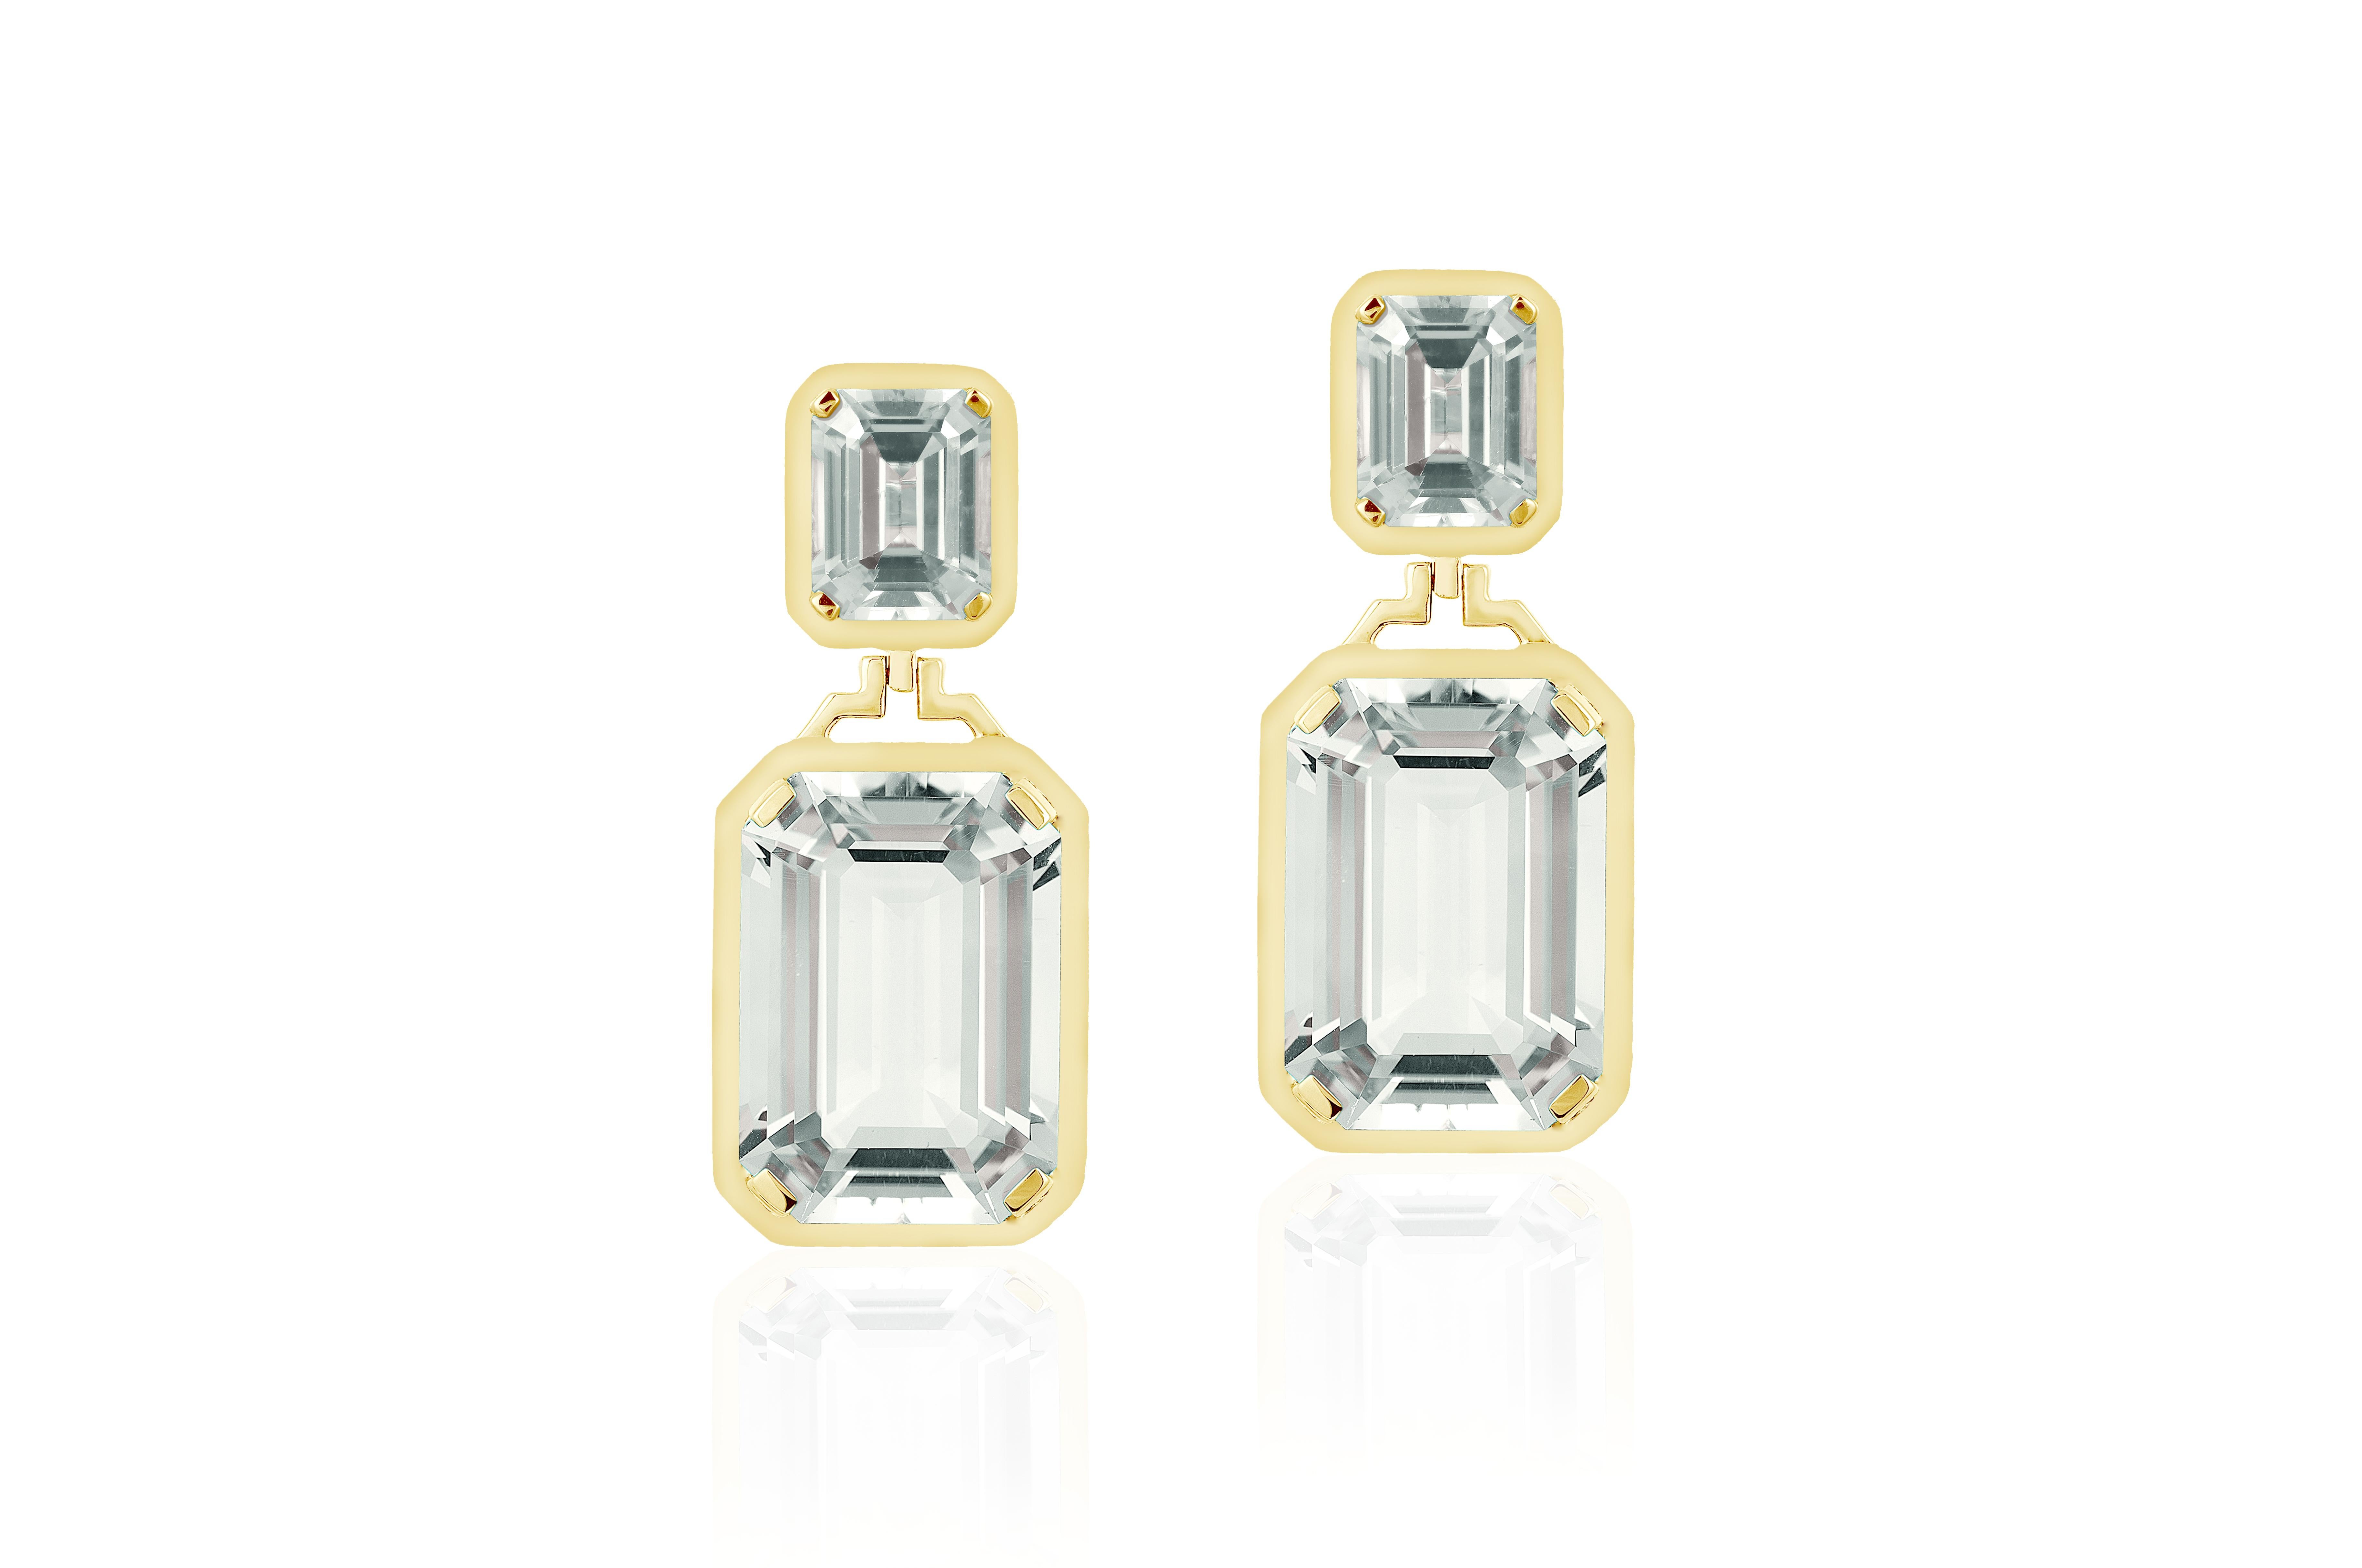 Double Emerald Cut Rock Crystal Long Earrings from 'Gossip' Collection

Stone Size: 10 x 8 - 20 x 14 mm